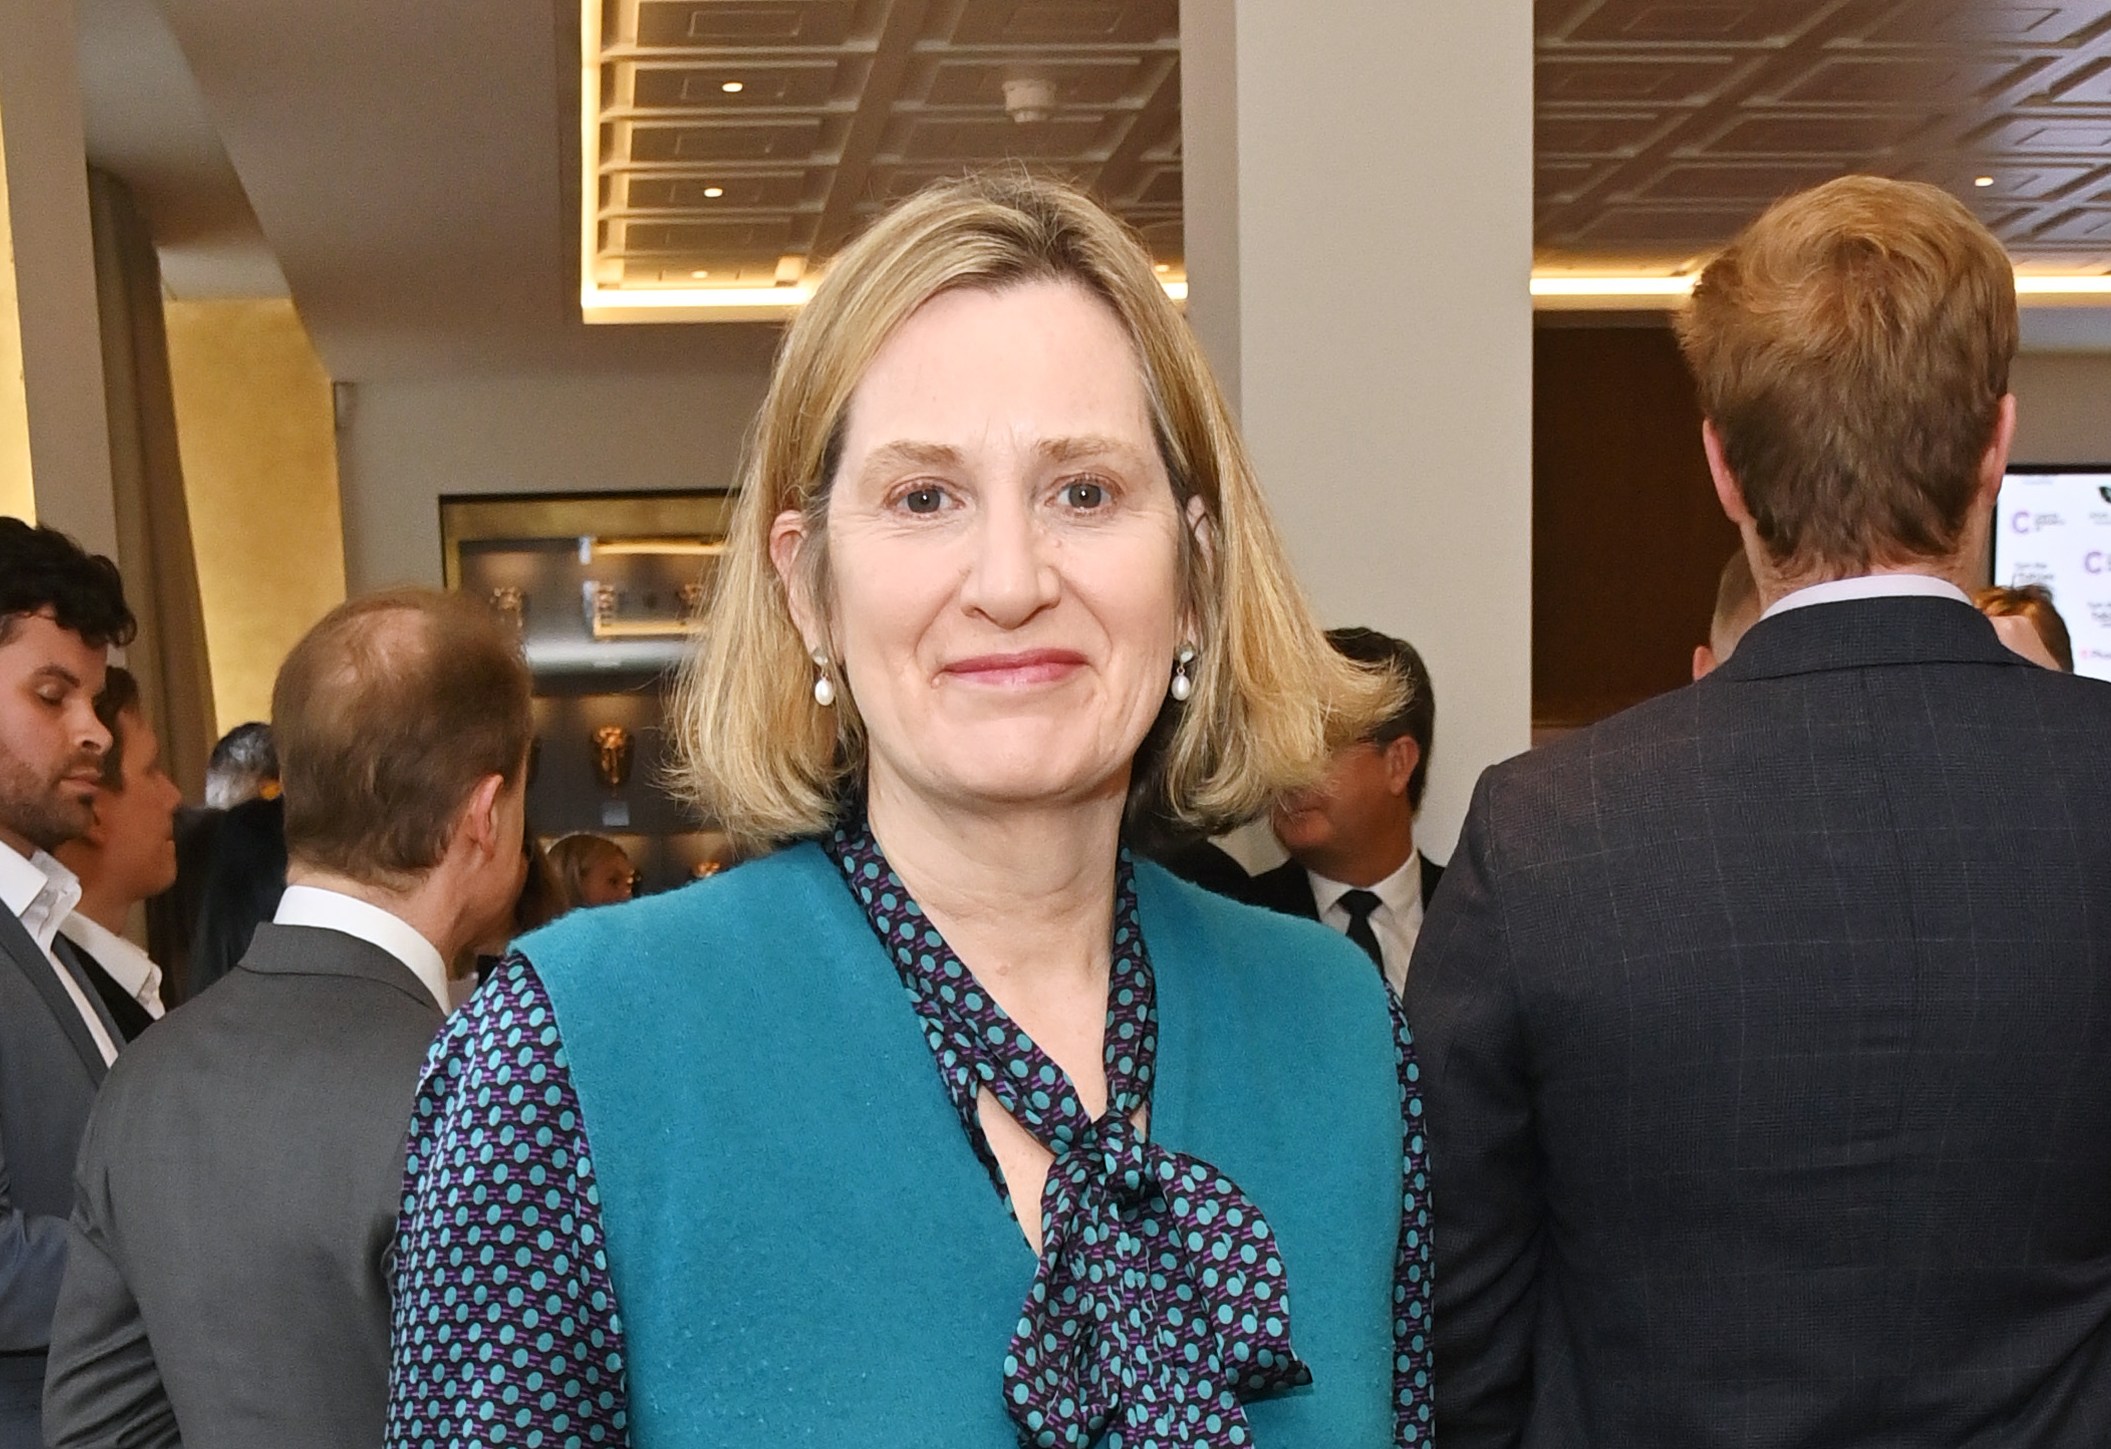 Amber Rudd, the former home secretary, was also on the list